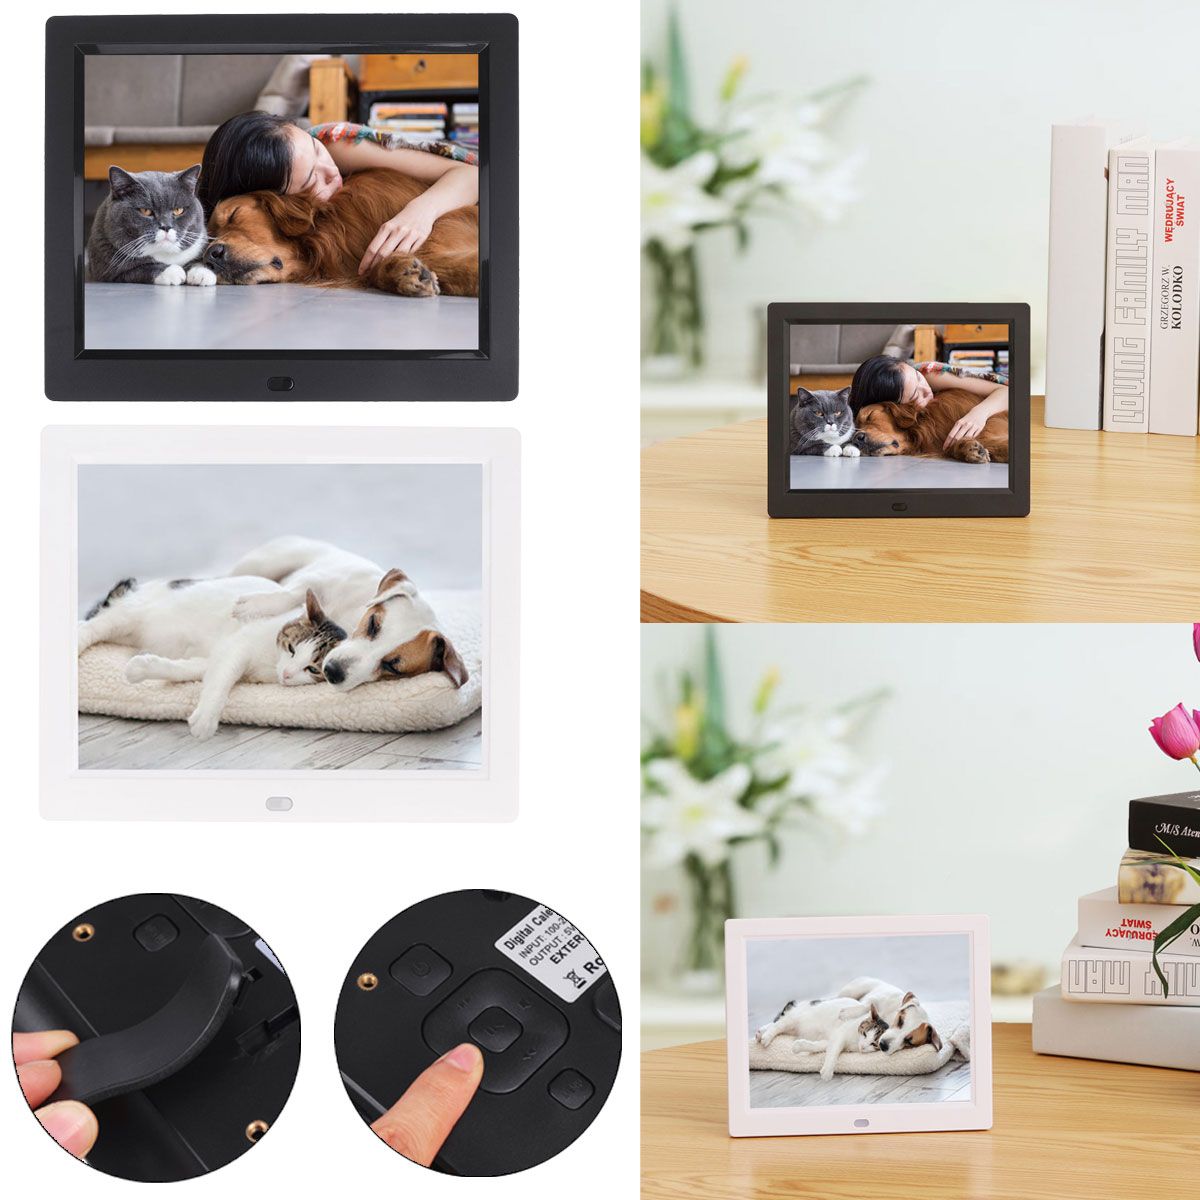 8inch-TFT-LCD-Digital-Photo-Frame-Electronic-Picture-Album-MP3-Video-Player-Clock-1625194